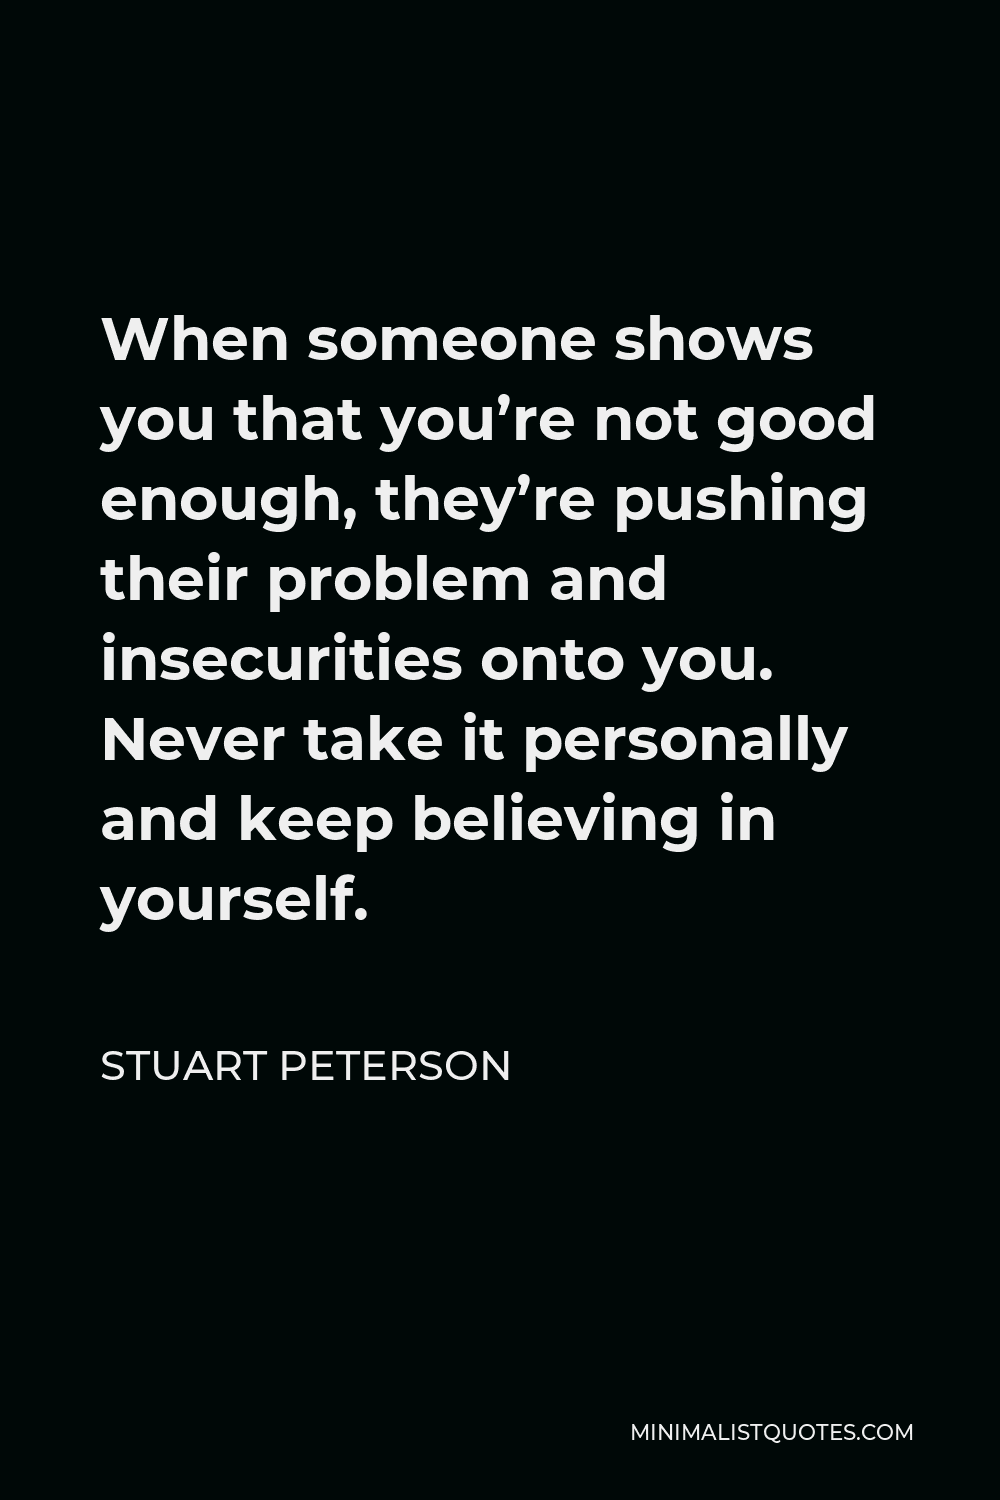 Stuart Peterson Quote - When someone shows you that you’re not good enough, they’re pushing their problem and insecurities onto you. Never take it personally and keep believing in yourself.